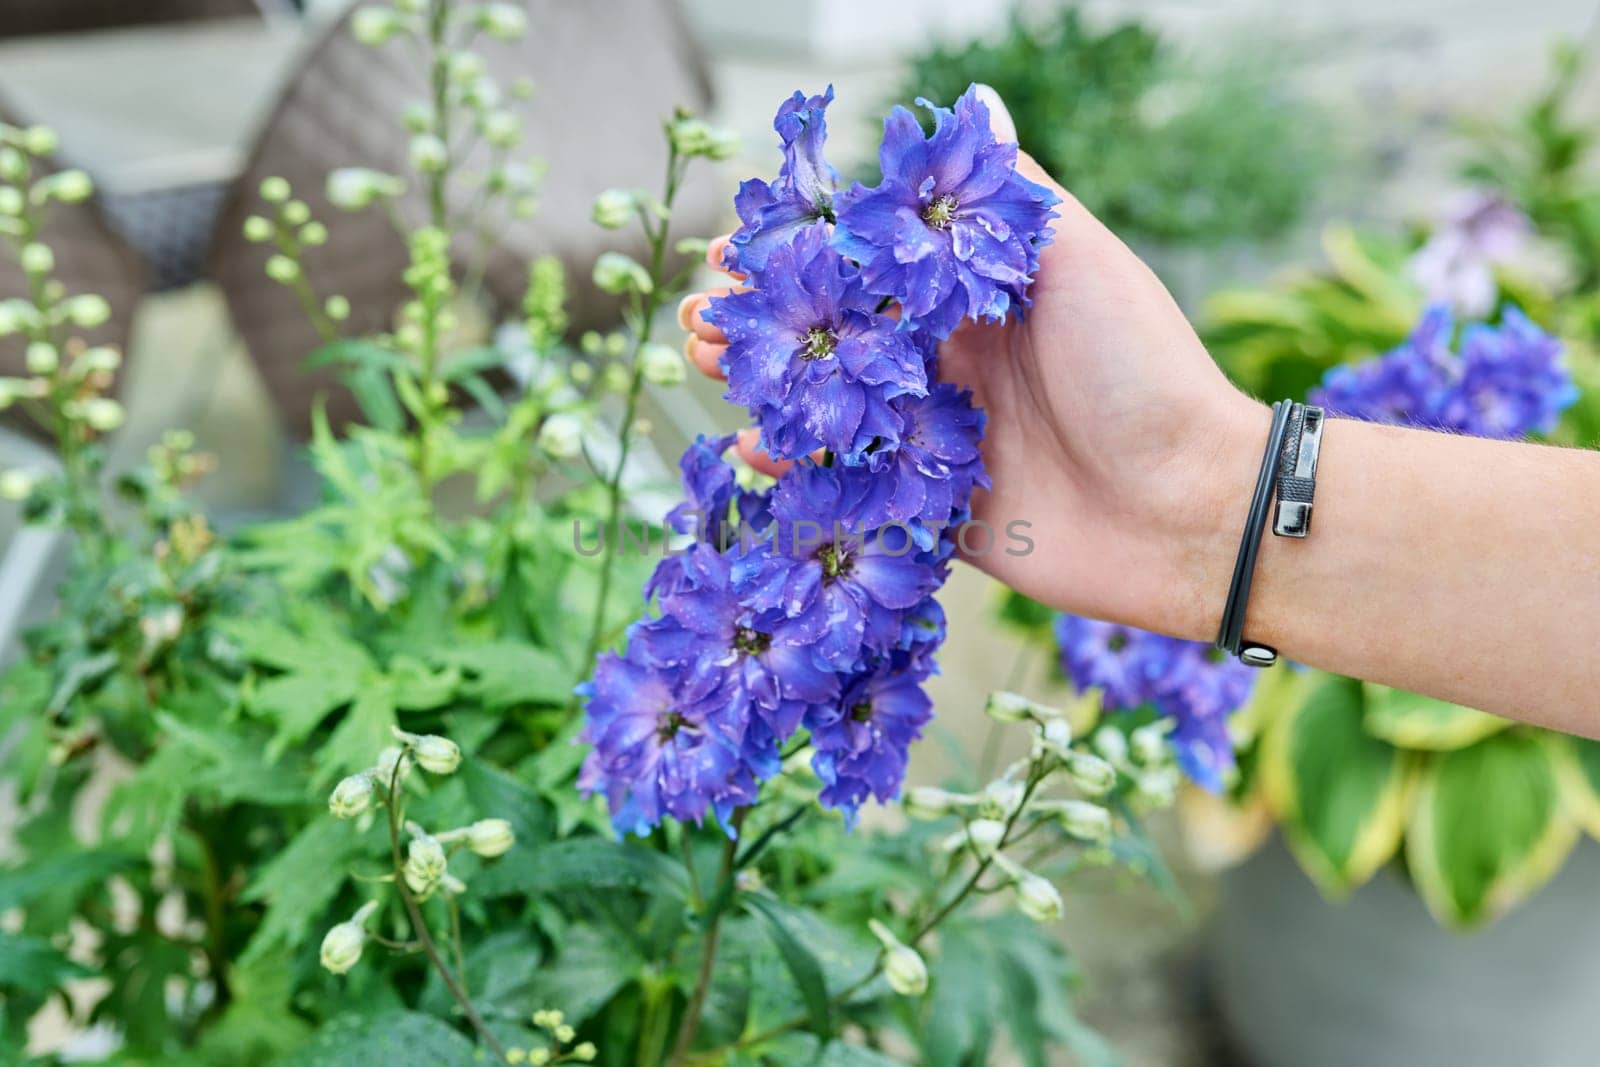 Larkspur plant high delphinium, blooming blue plant, hand touching flowers.